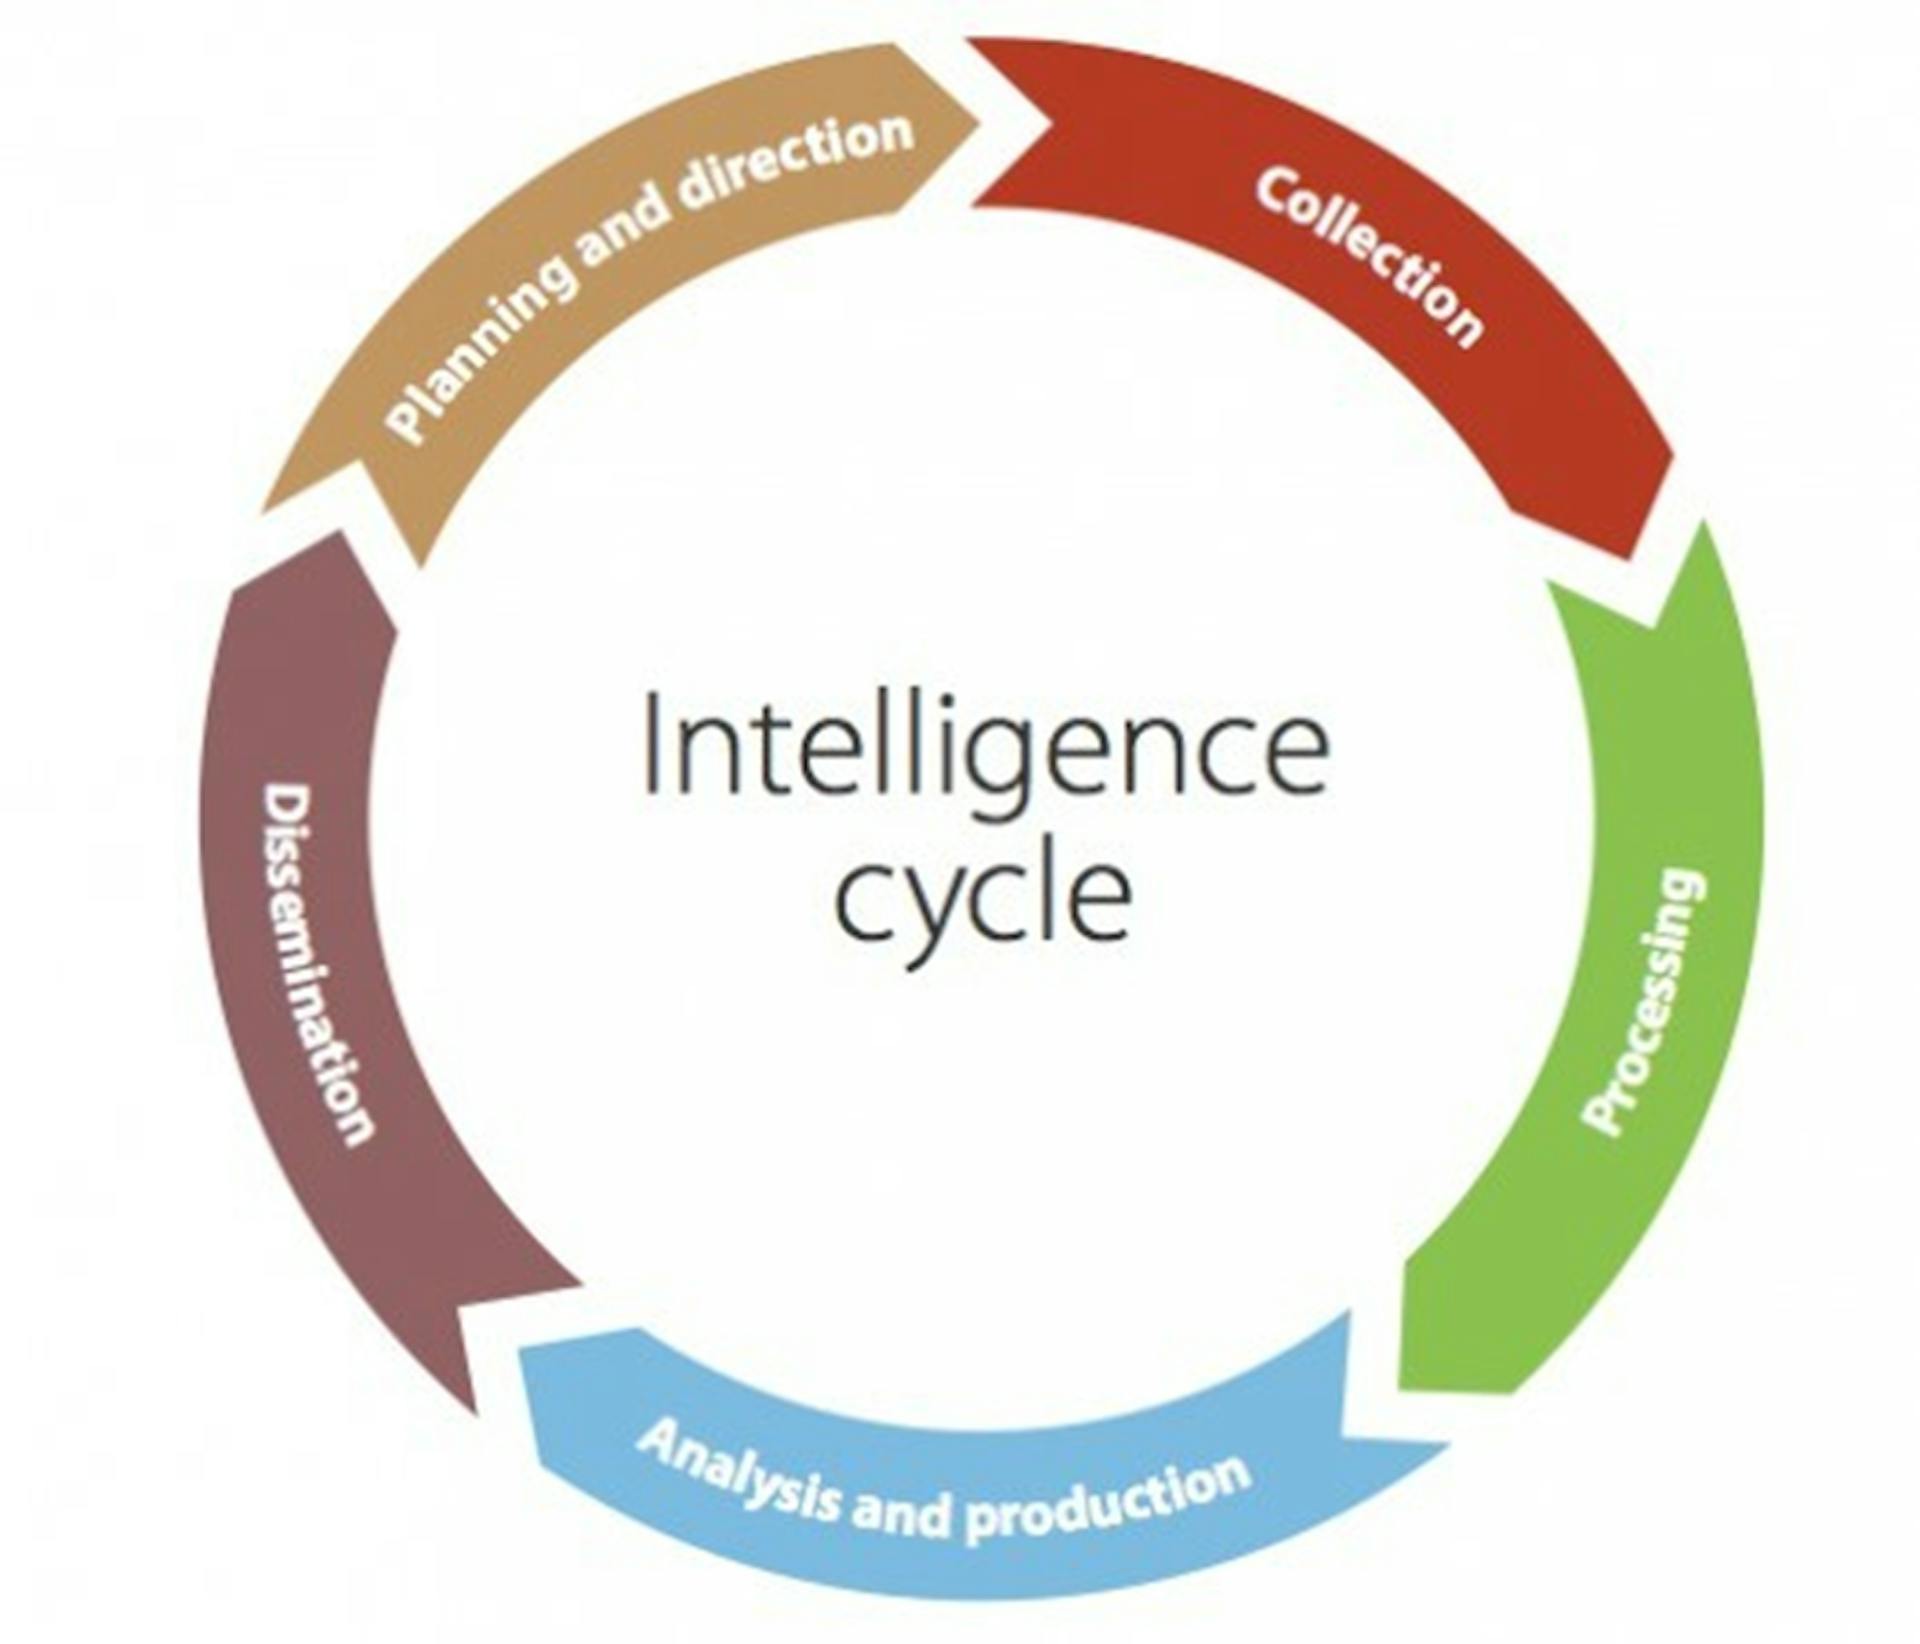  Stages of the Threat Intelligence Life Cycle